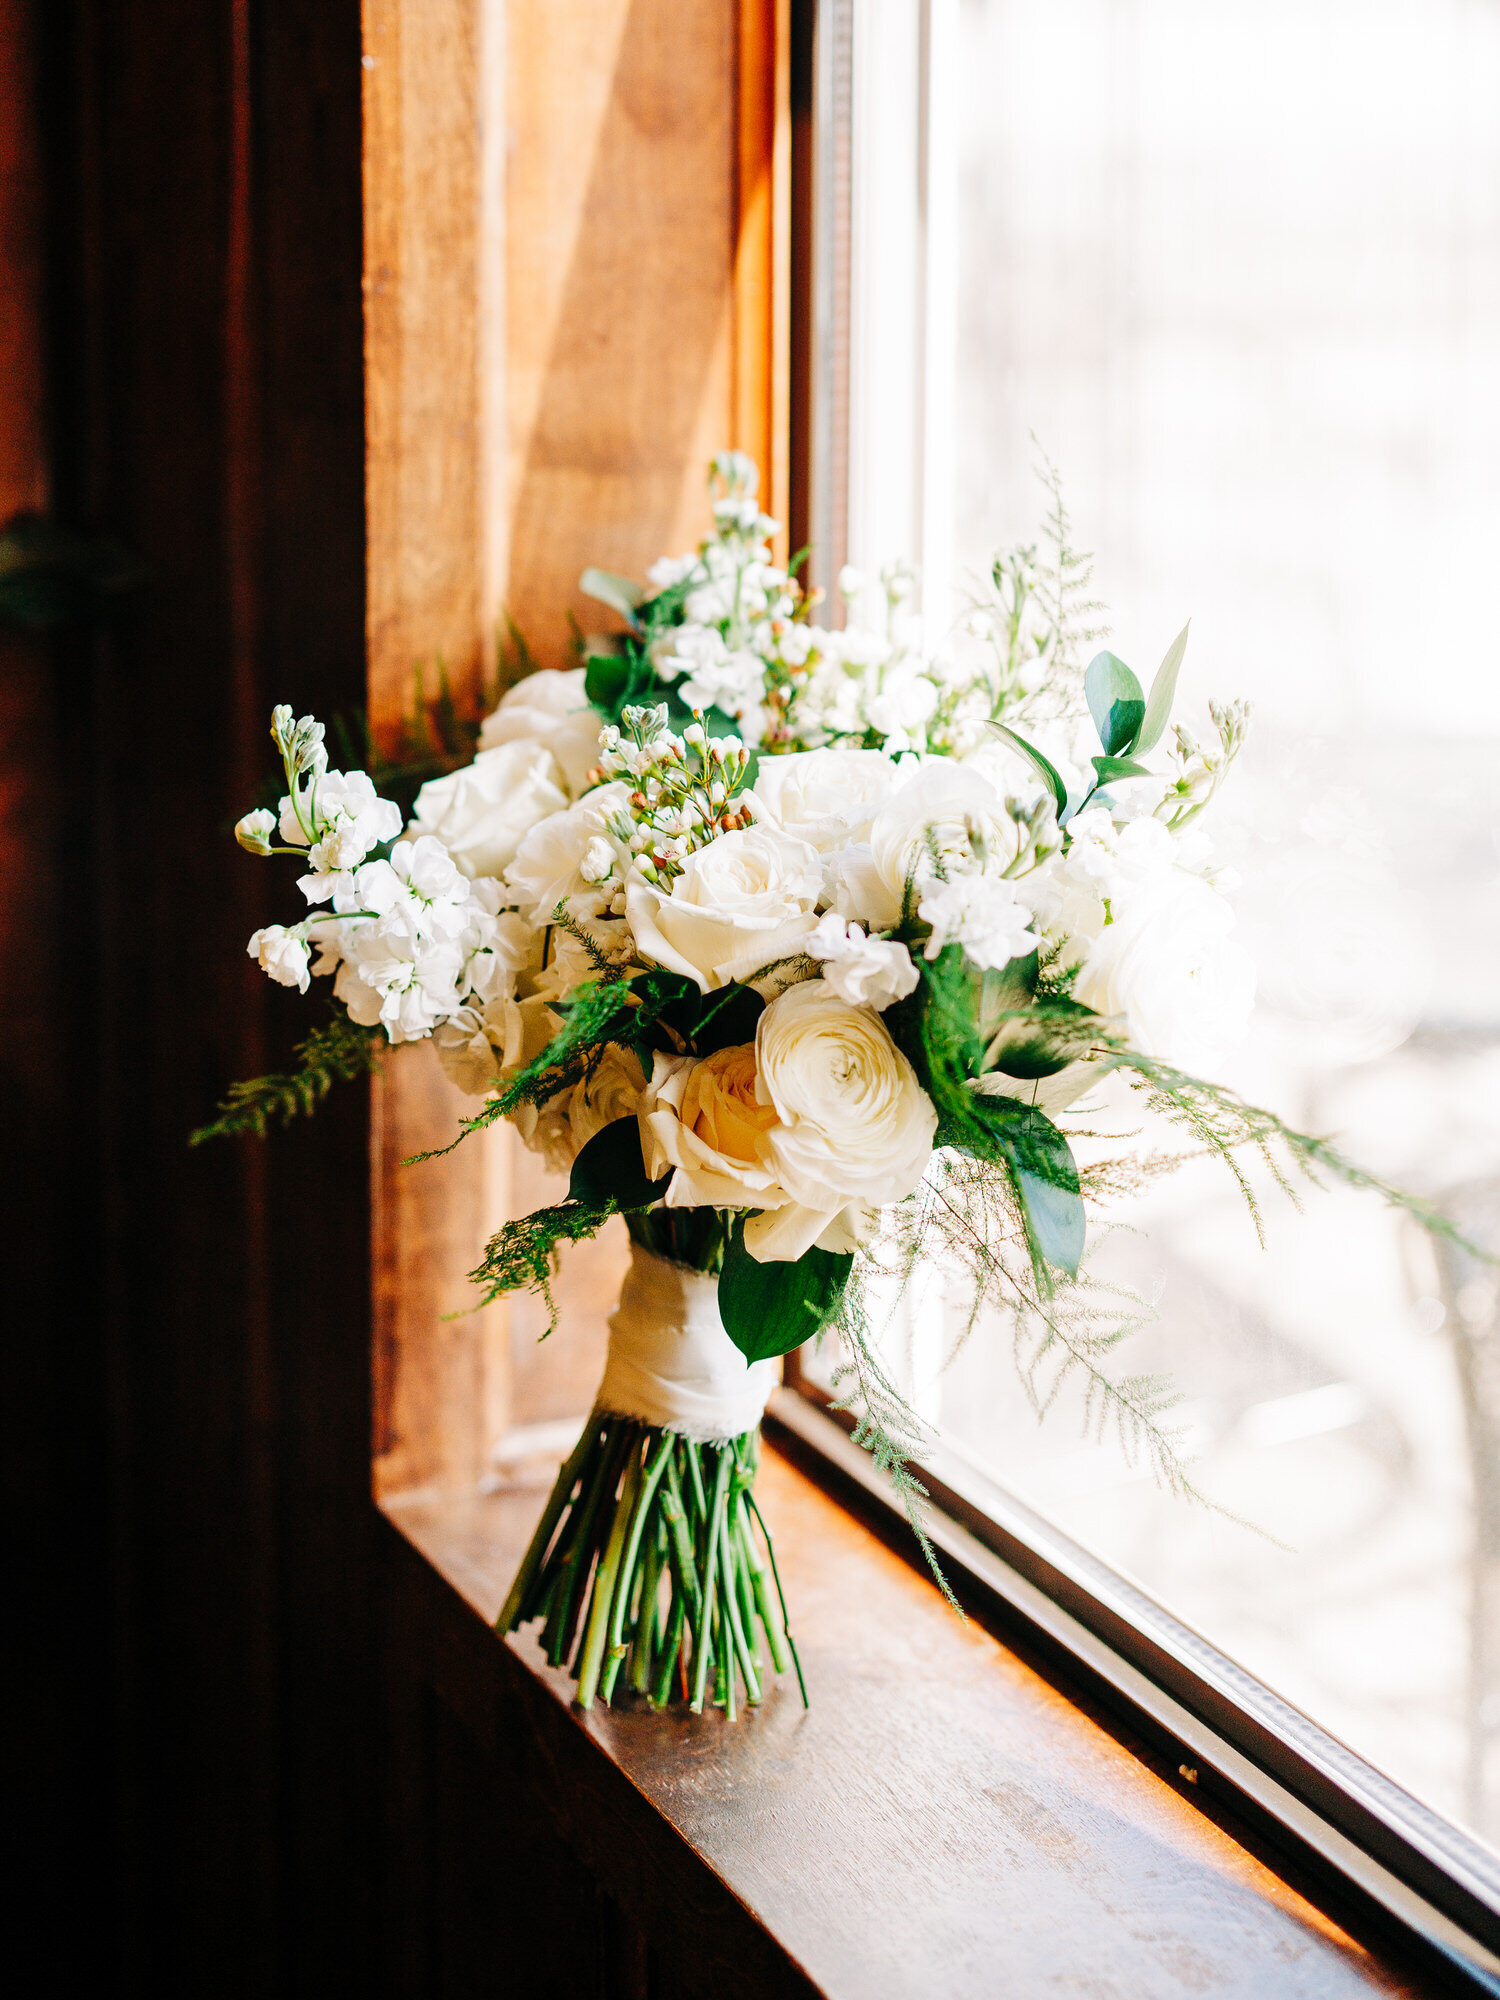 This image, taken by Austin wedding photographer KD Captures, features a white floral bouquet with baby's breath and white roses paired with other greenery. The bouquet is propped up on a windowsill.